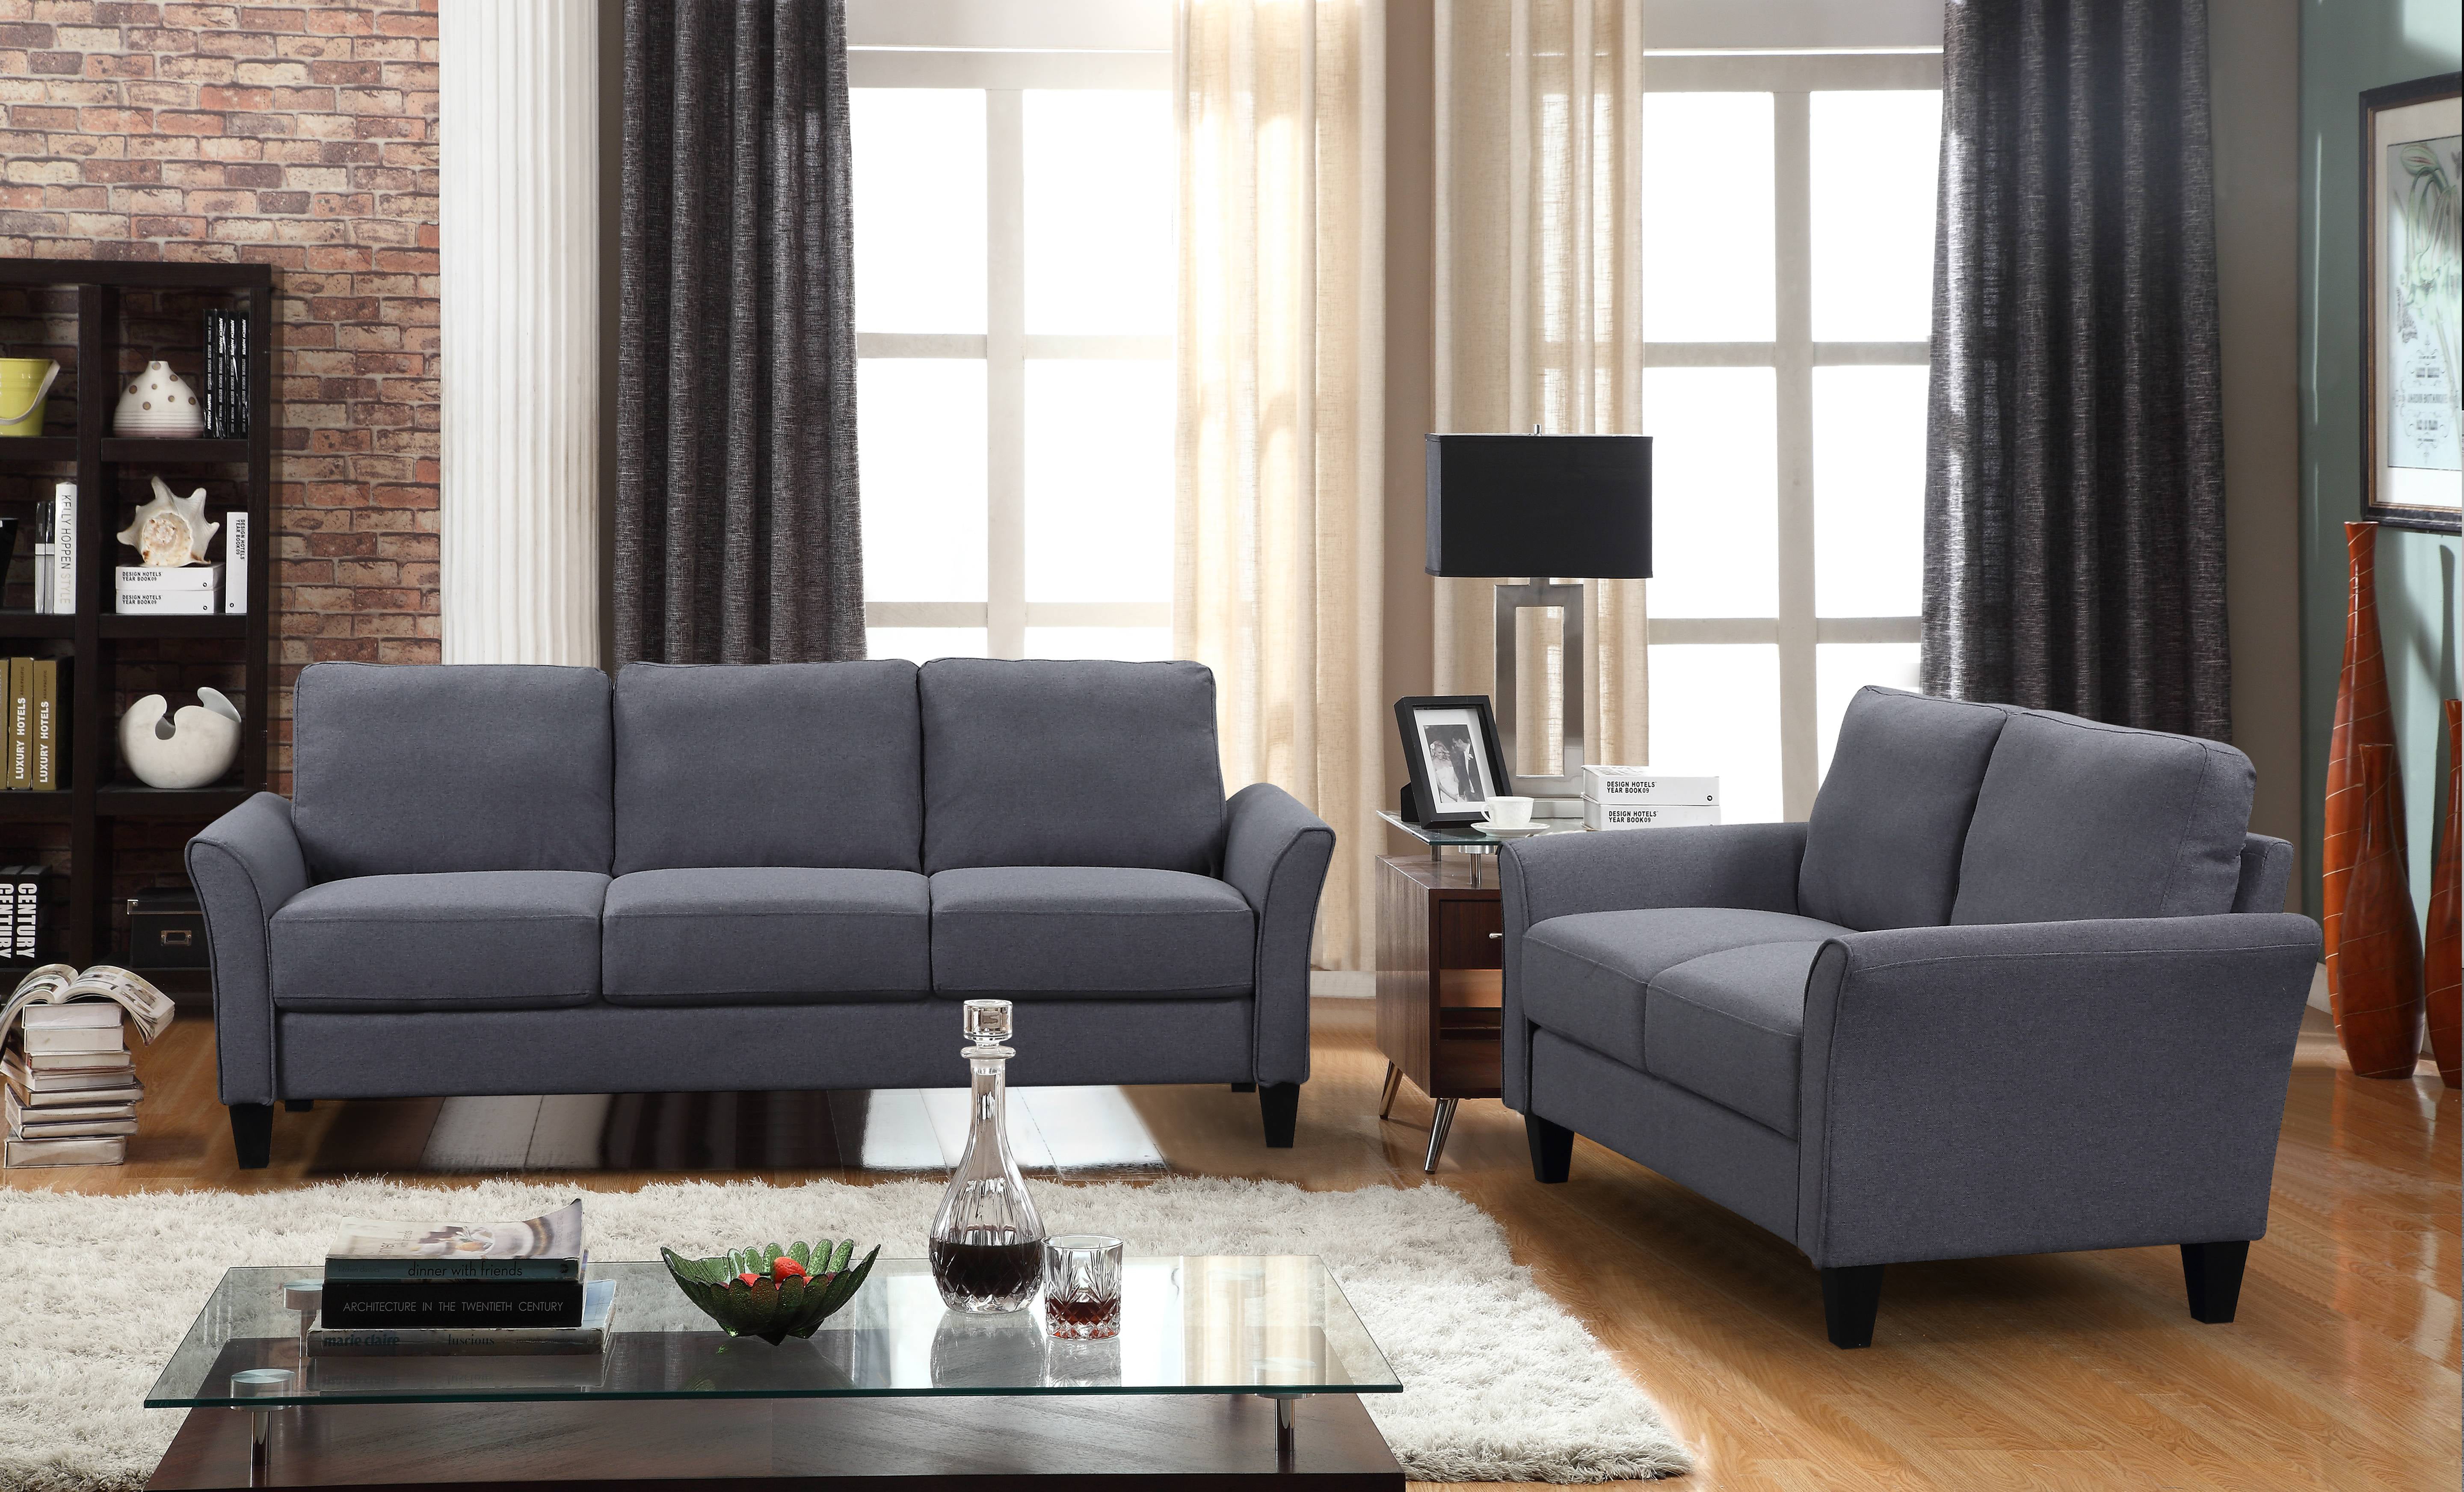 Clearance! Sectional Couch and Sofa Set for Living Room, 3 Piece Grey